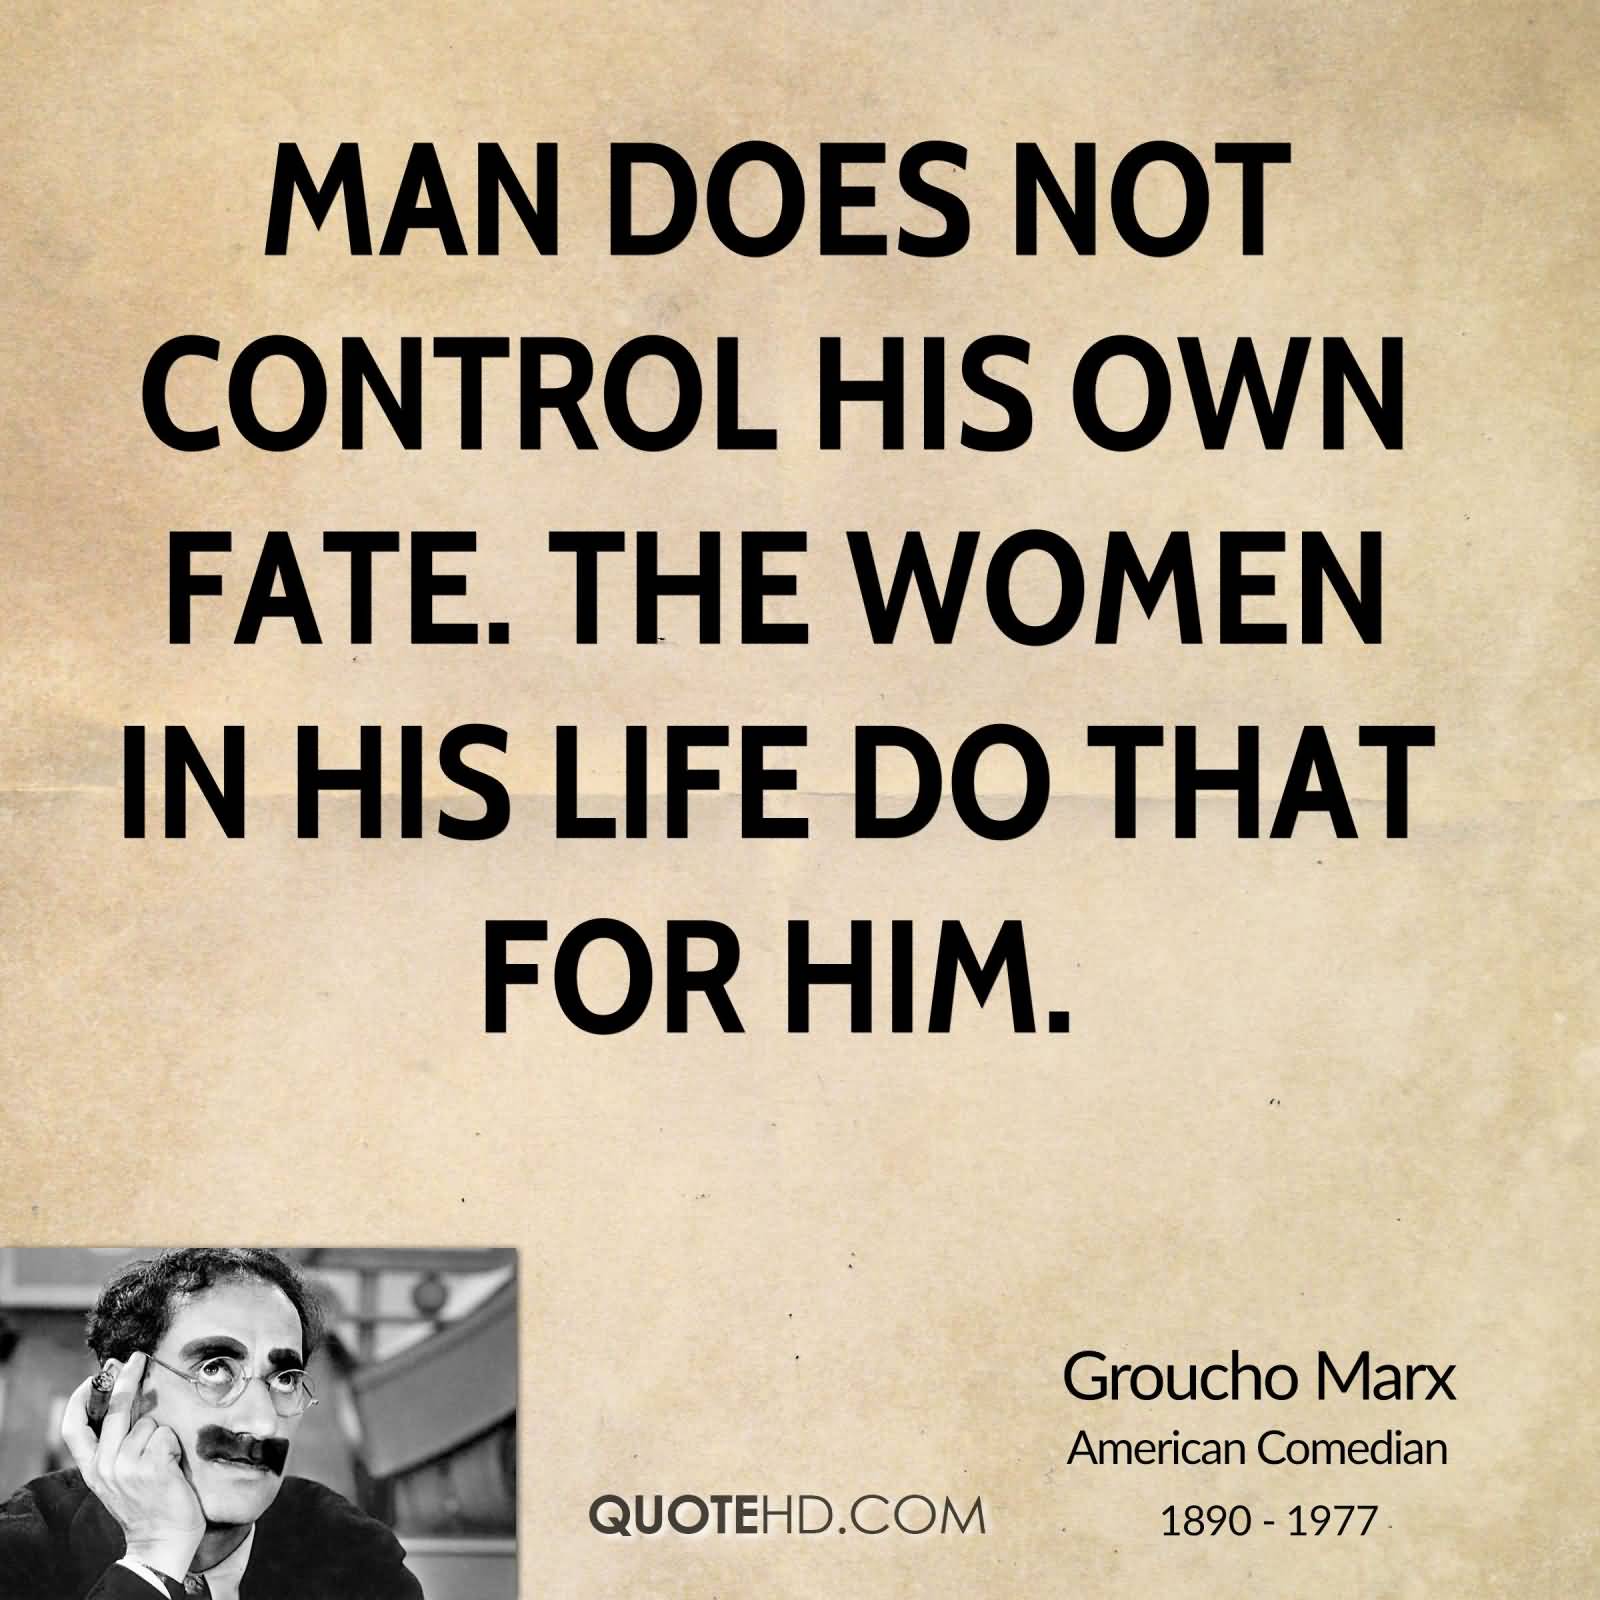 Man does not control his own fate. The women in his life do that for him. Groucho Marx